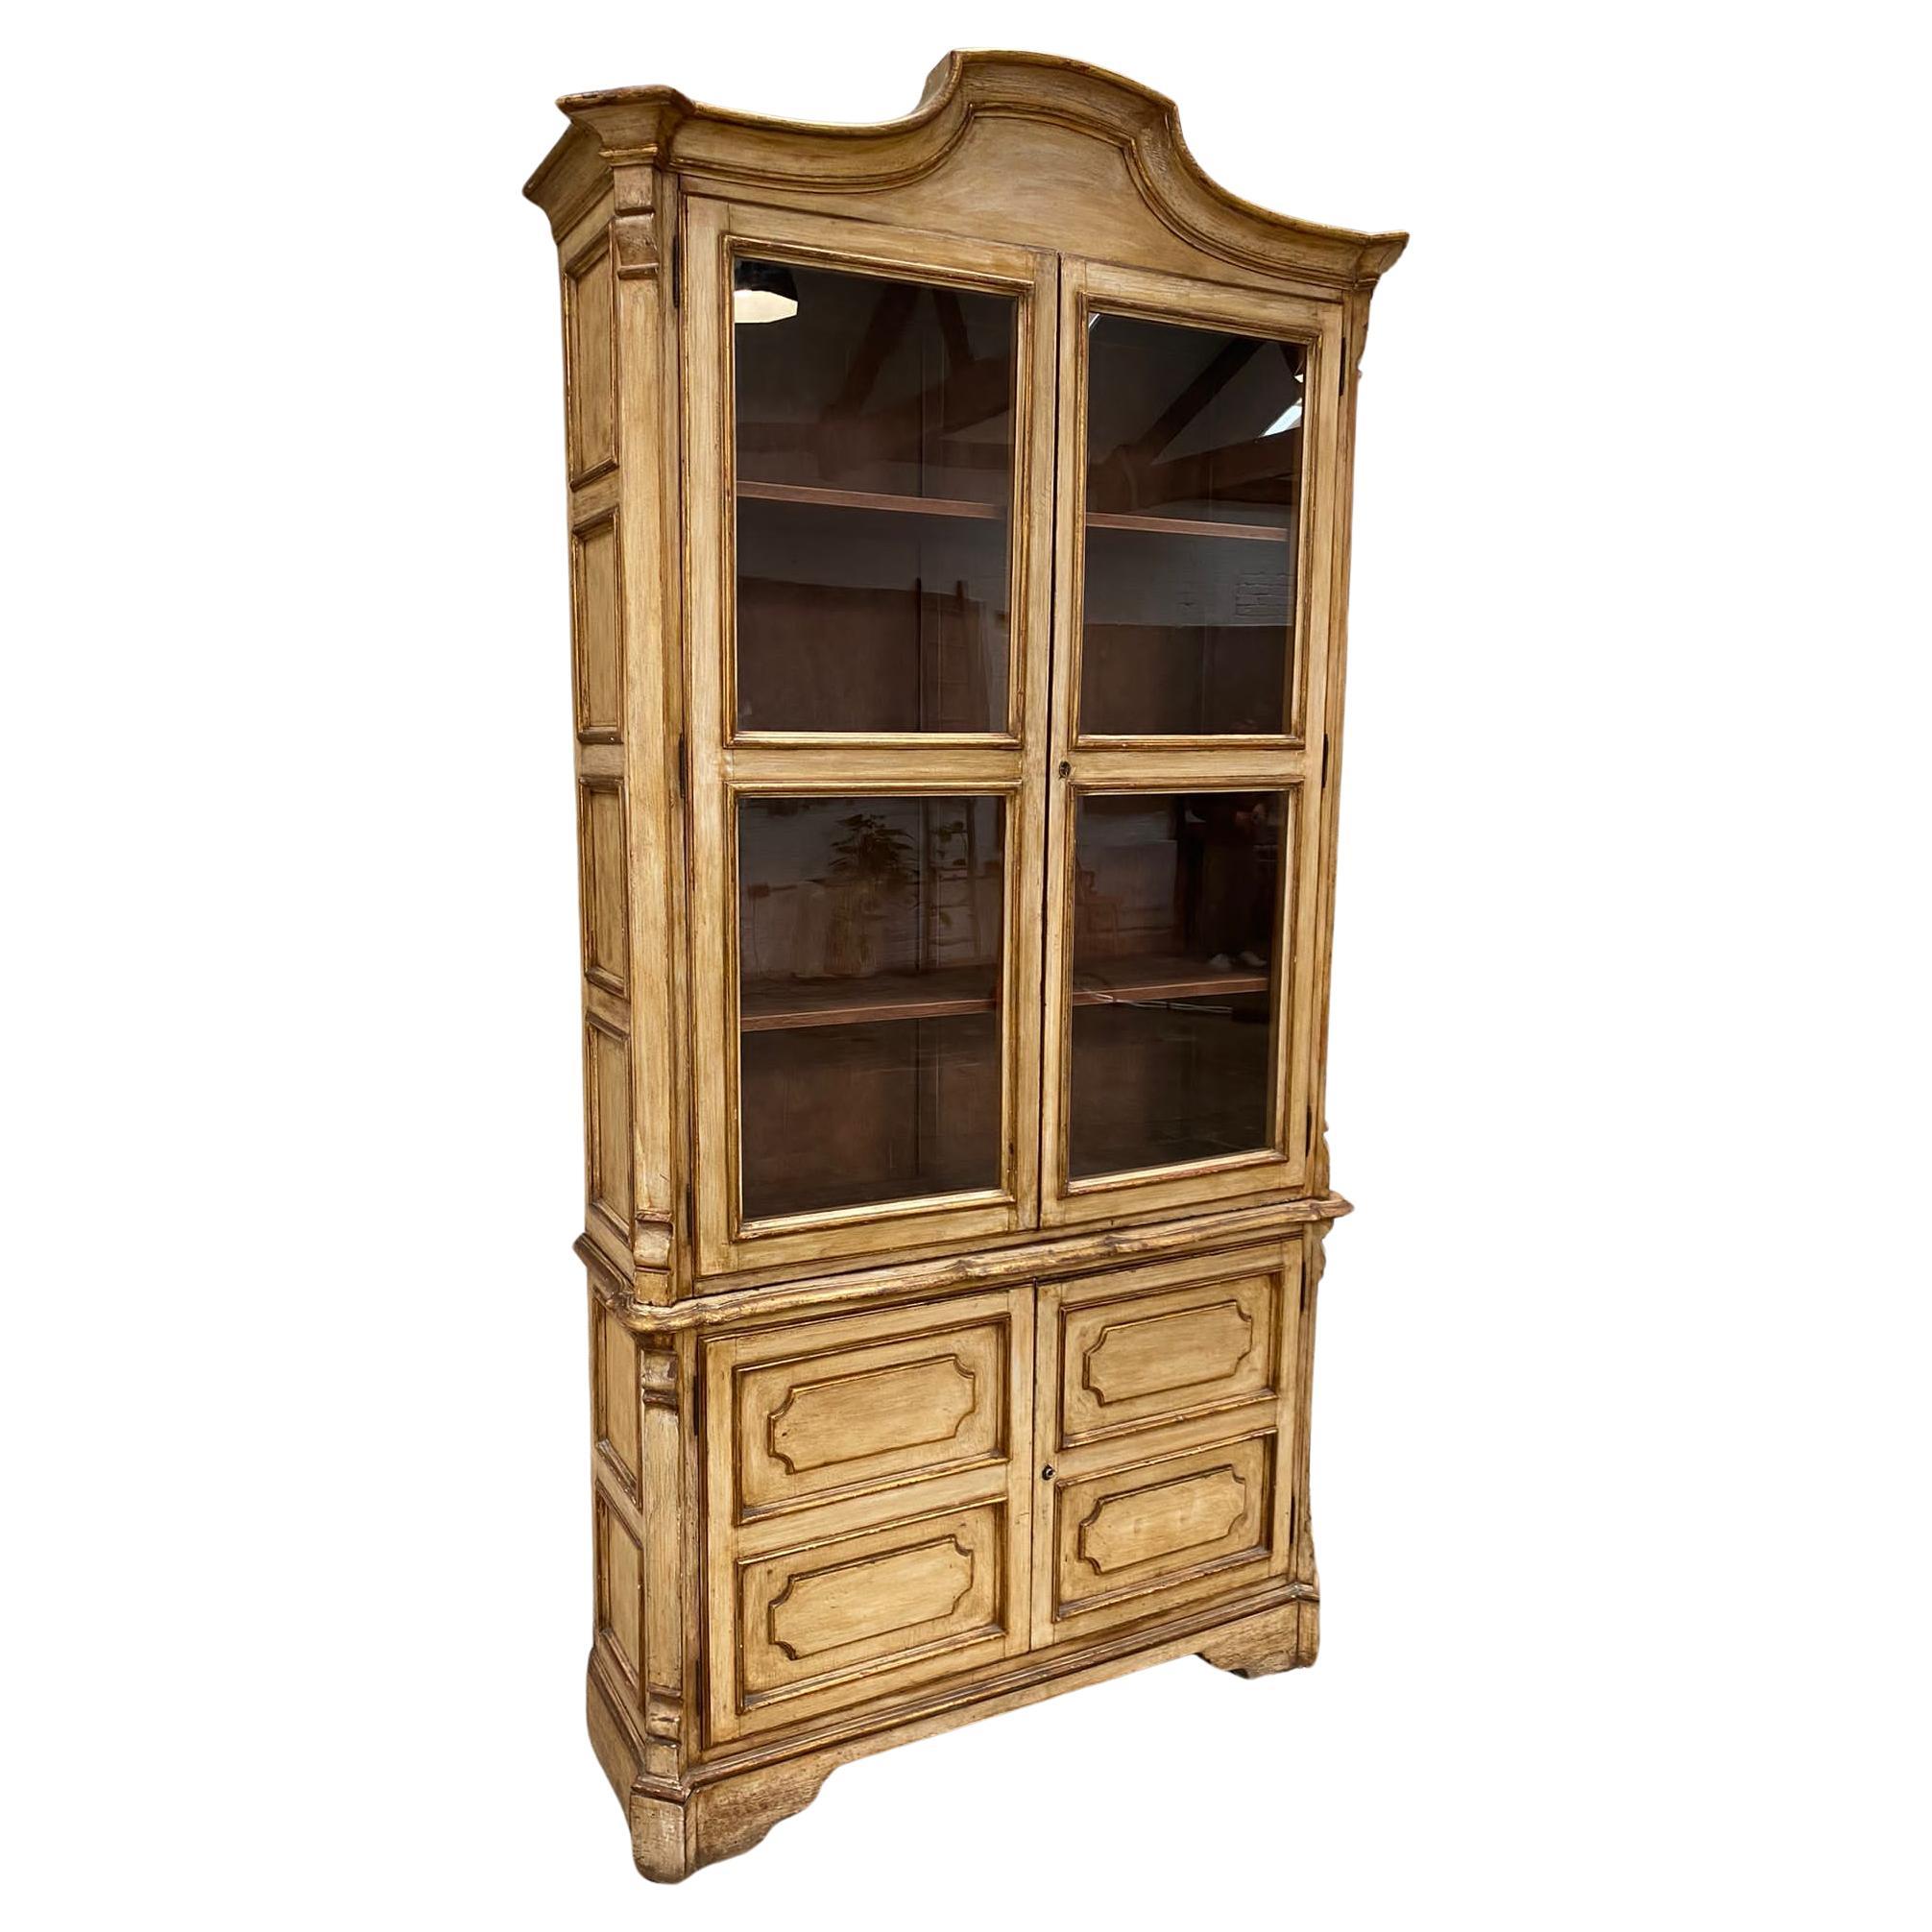 Italian Antique Painted and Gilded Glazed Cabinet Bookcase, 1920's For Sale